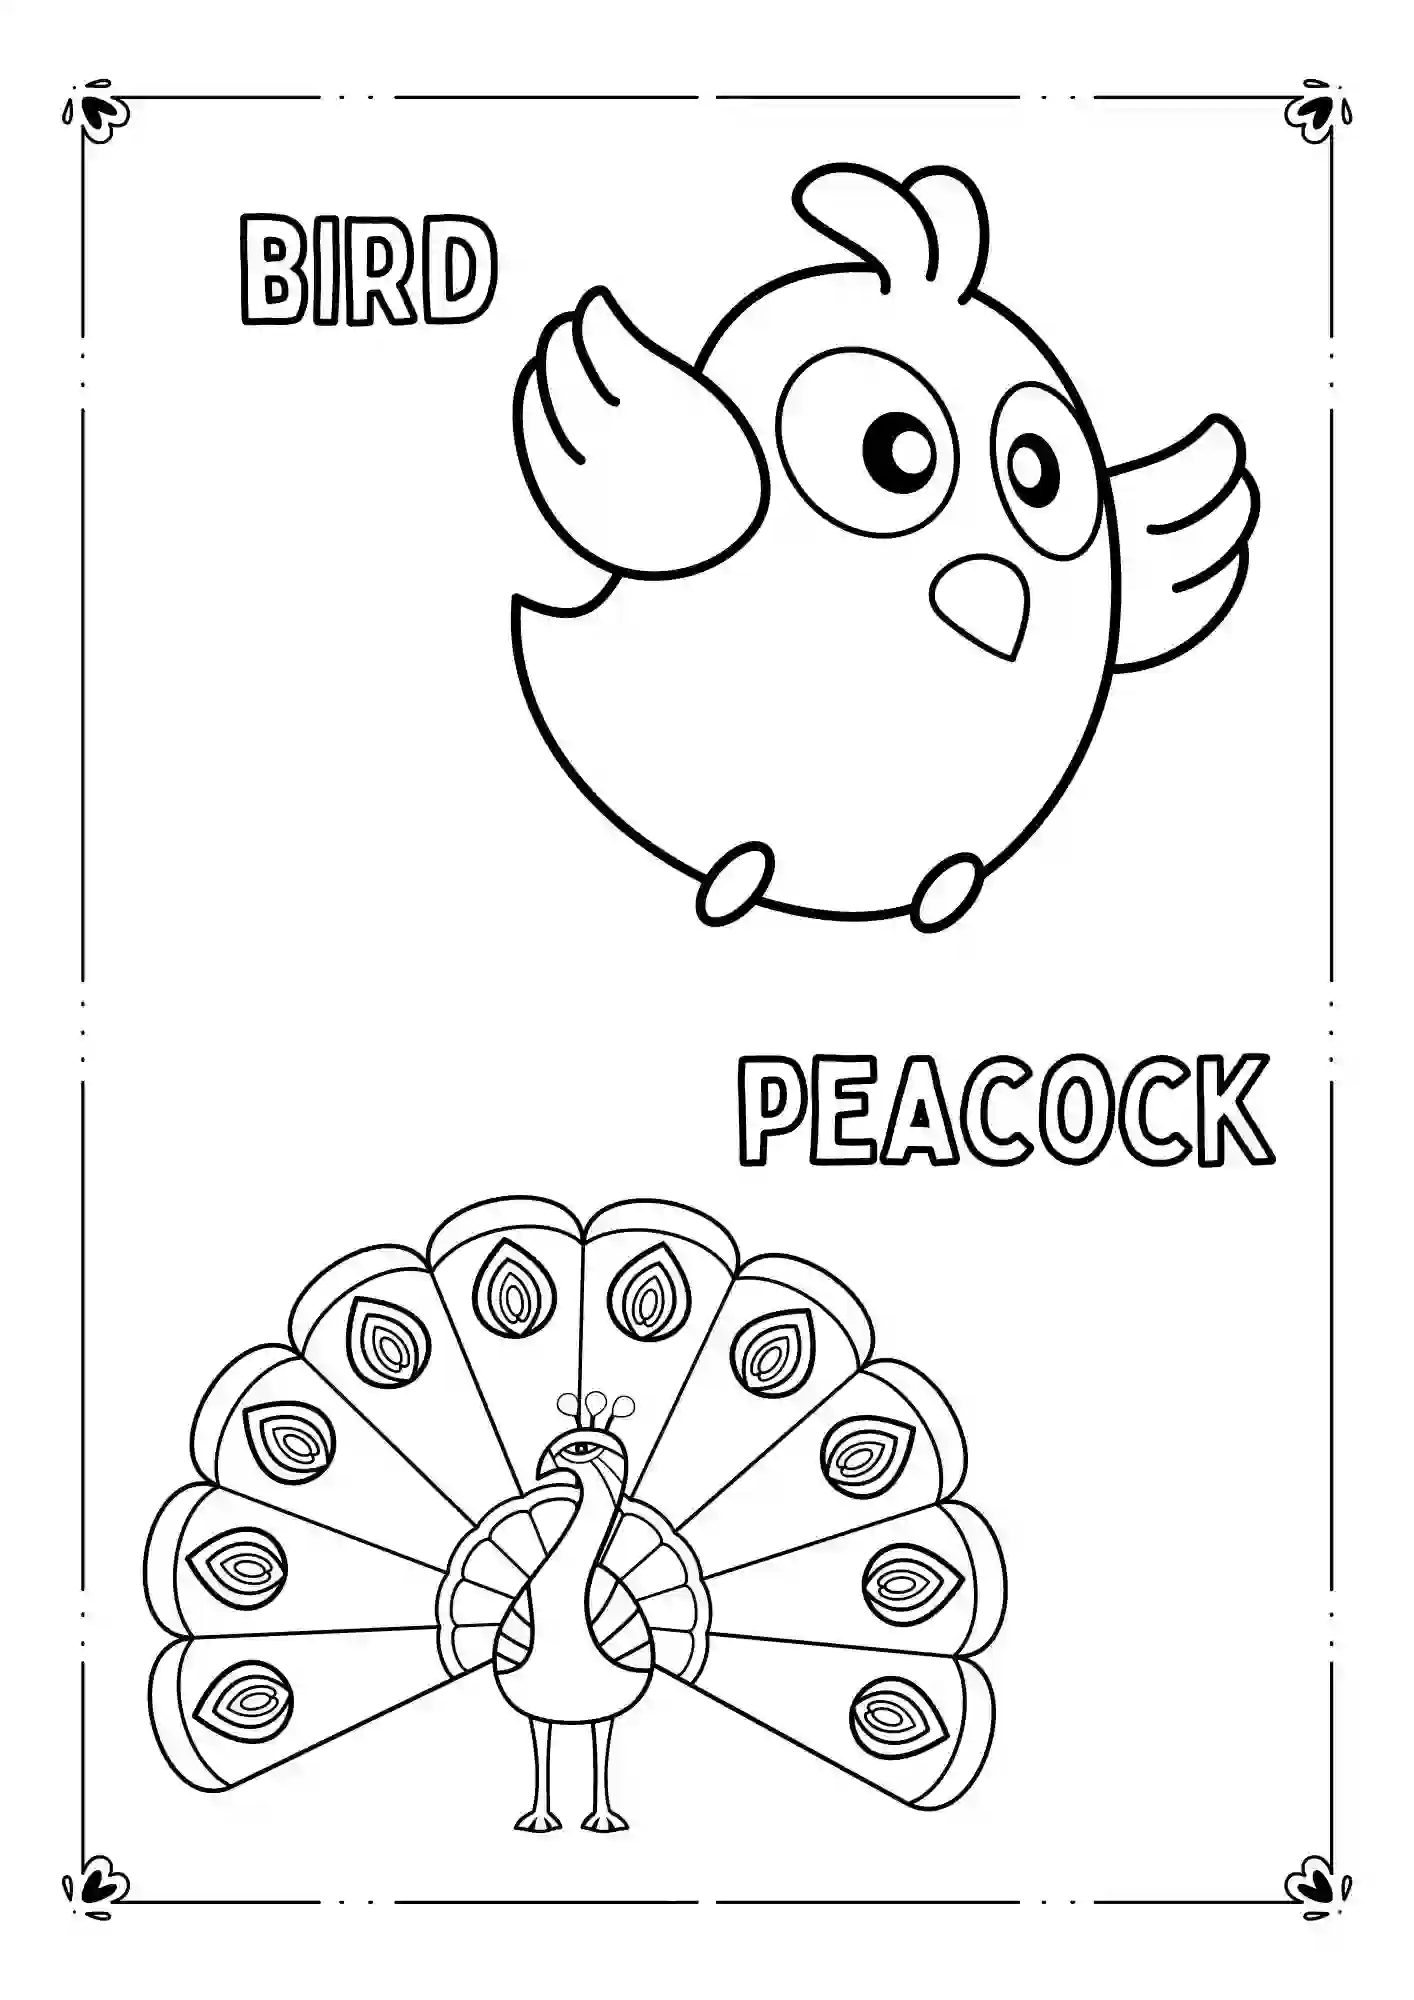 Farm Animals Coloring Worksheets (BIRD AND PEACOCK)